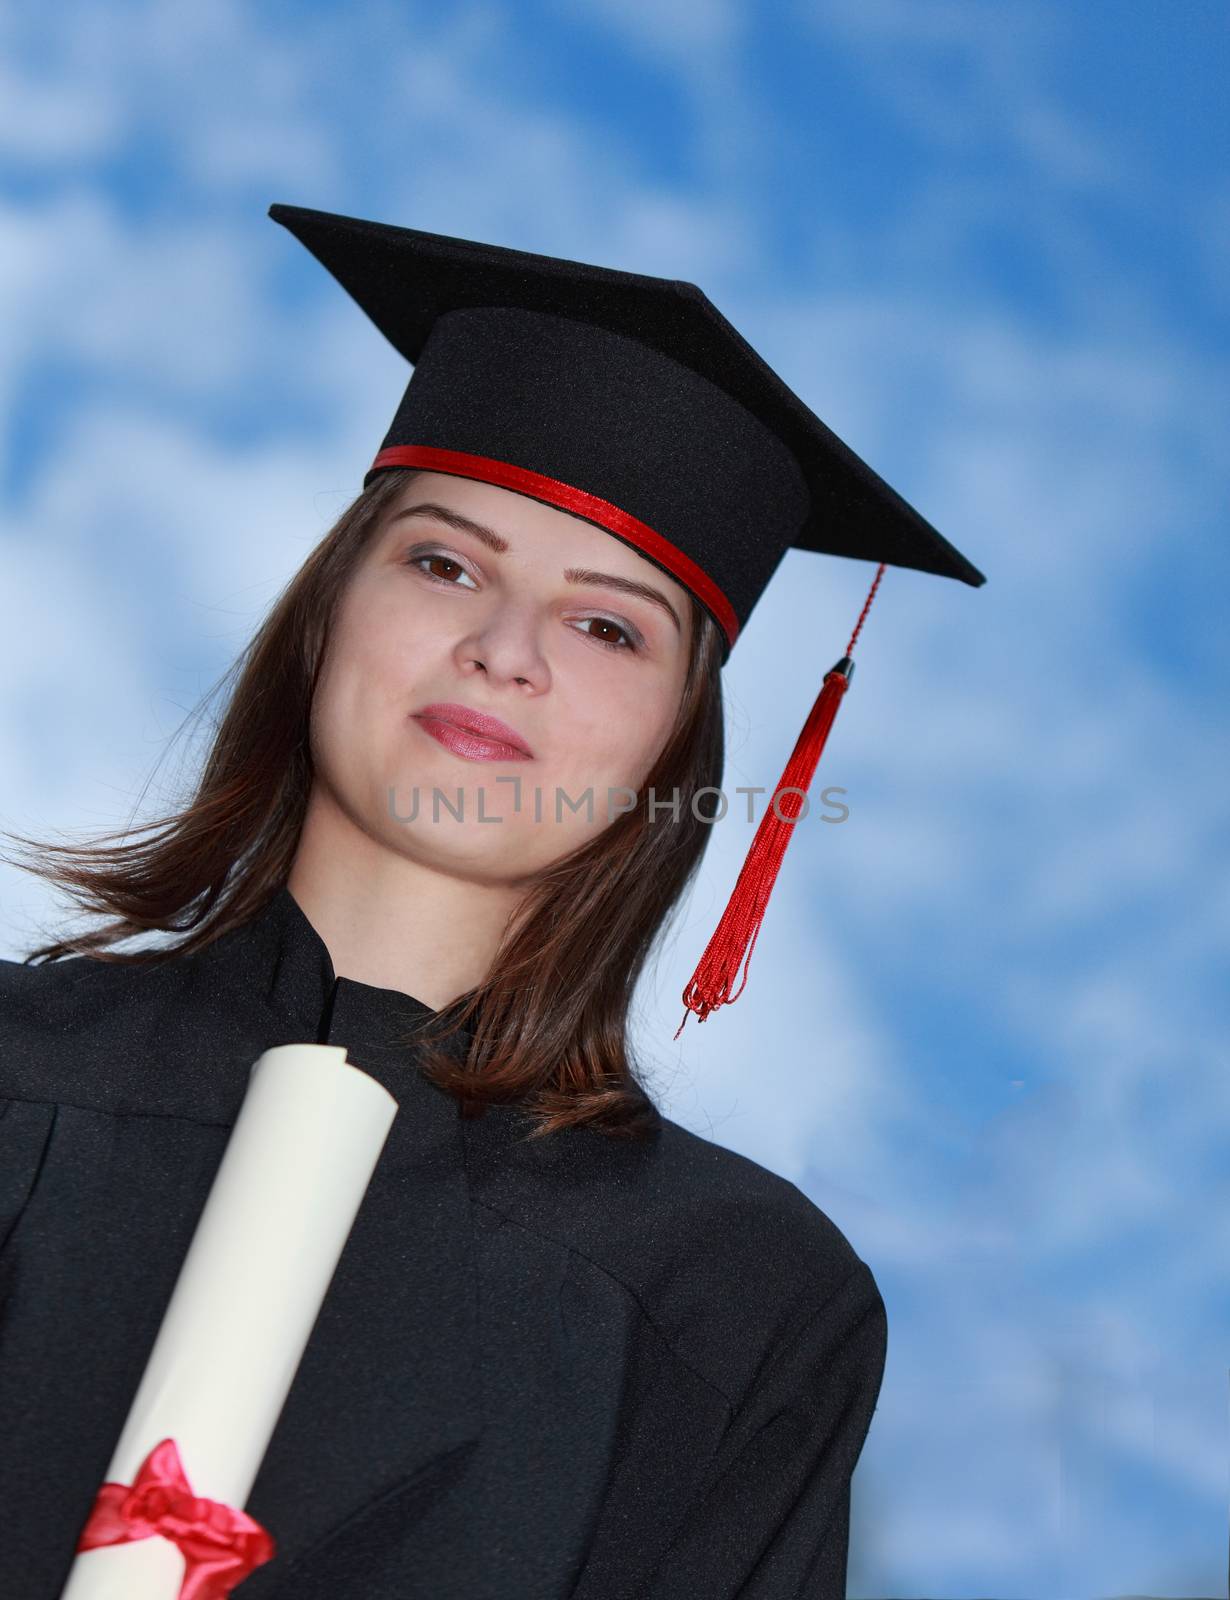 Portrait of a Woman in Graduation Gown by RazvanPhotography